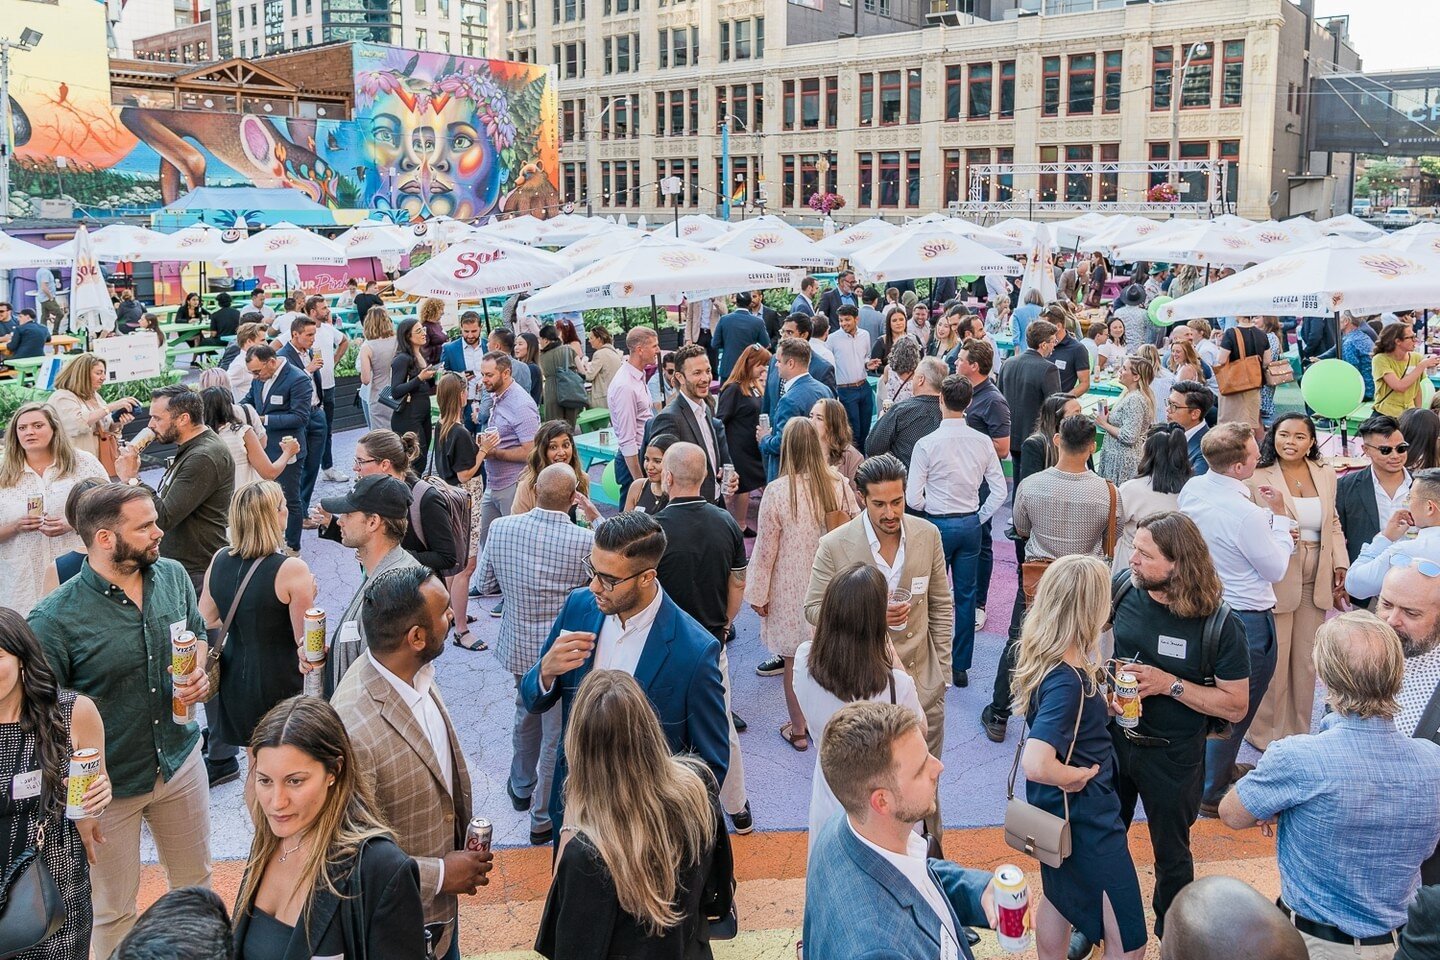 Last year's ULI Toronto Summer Social brought together real estate and development professionals for a highly anticipated networking event. The spacious RendezViews patio, hosted by The Fifth Social Club and The Ballroom owners, provided a casual atm